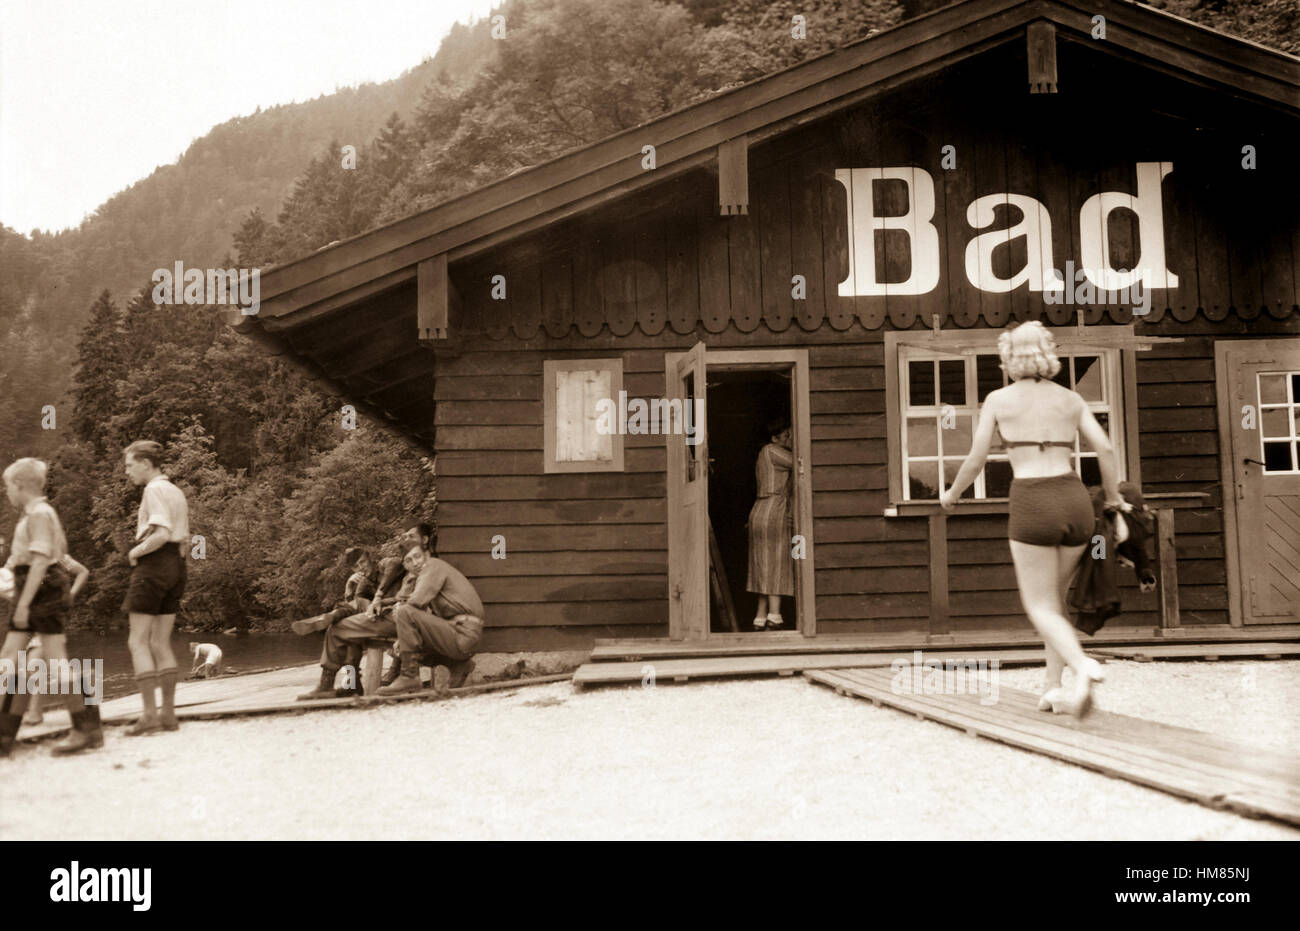 Verboten! Men 101st Airborne Div. remember they can not fraternize as they watch a shapely fraulein swing up the walk to their rest center in konignsee, Germany.  June 18, 1945  Sgt. R. Sawyer. (Army) Exact Date Shot Unknown NARA FILE #:  111-SC-208042 WAR & CONFLICT BOOK #:  1263 Stock Photo